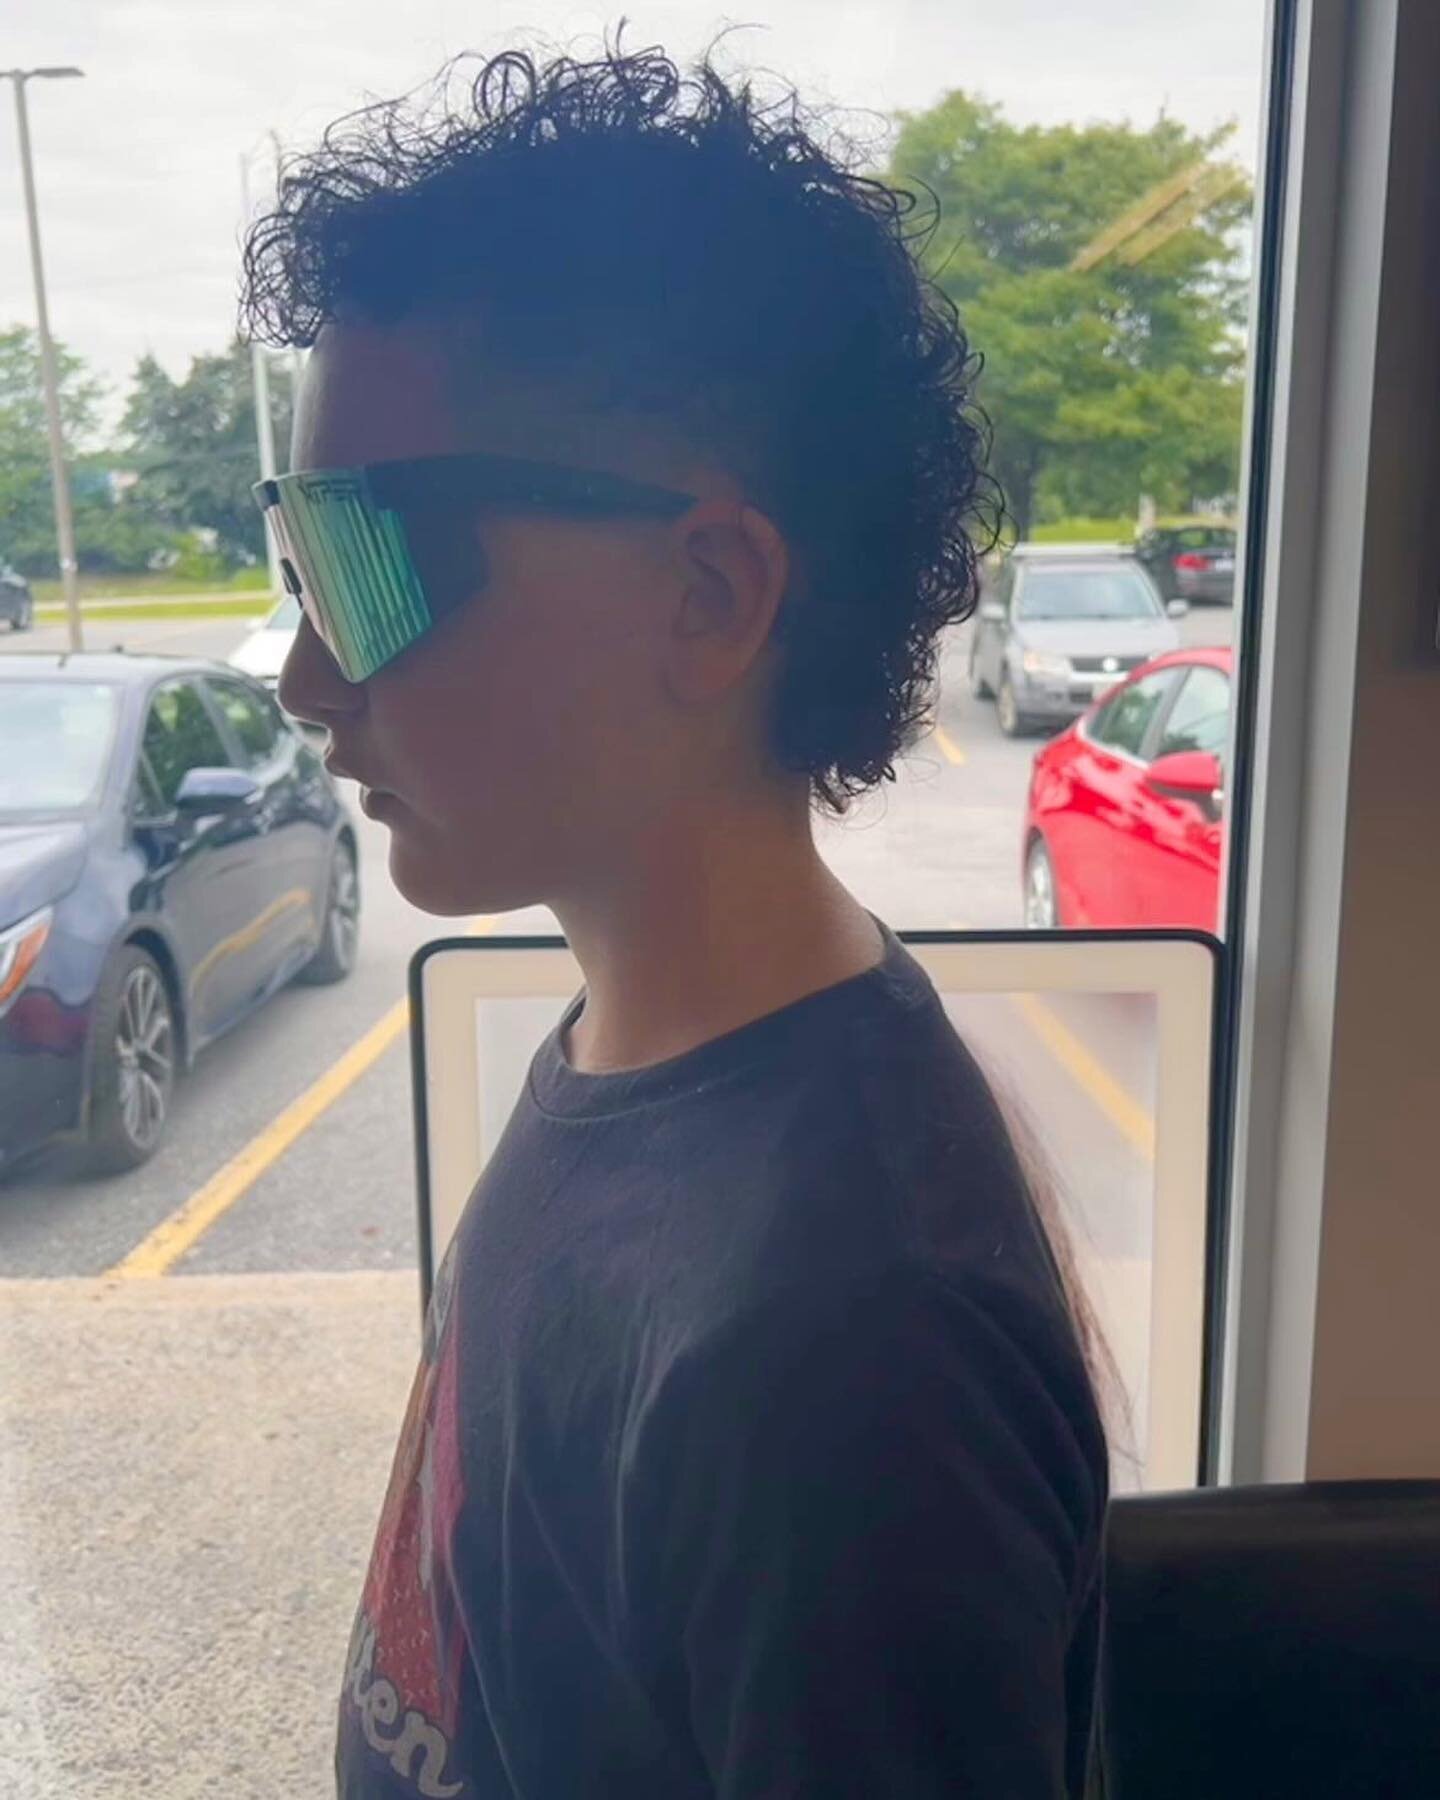 We style many cool cuts on many cool dudes and this guy is no exception! He sports his natural curls with a mullet style and the coolest shades ever! If you like this cut and style give us a call to book an appointment at 613-836-3435 or come in as a